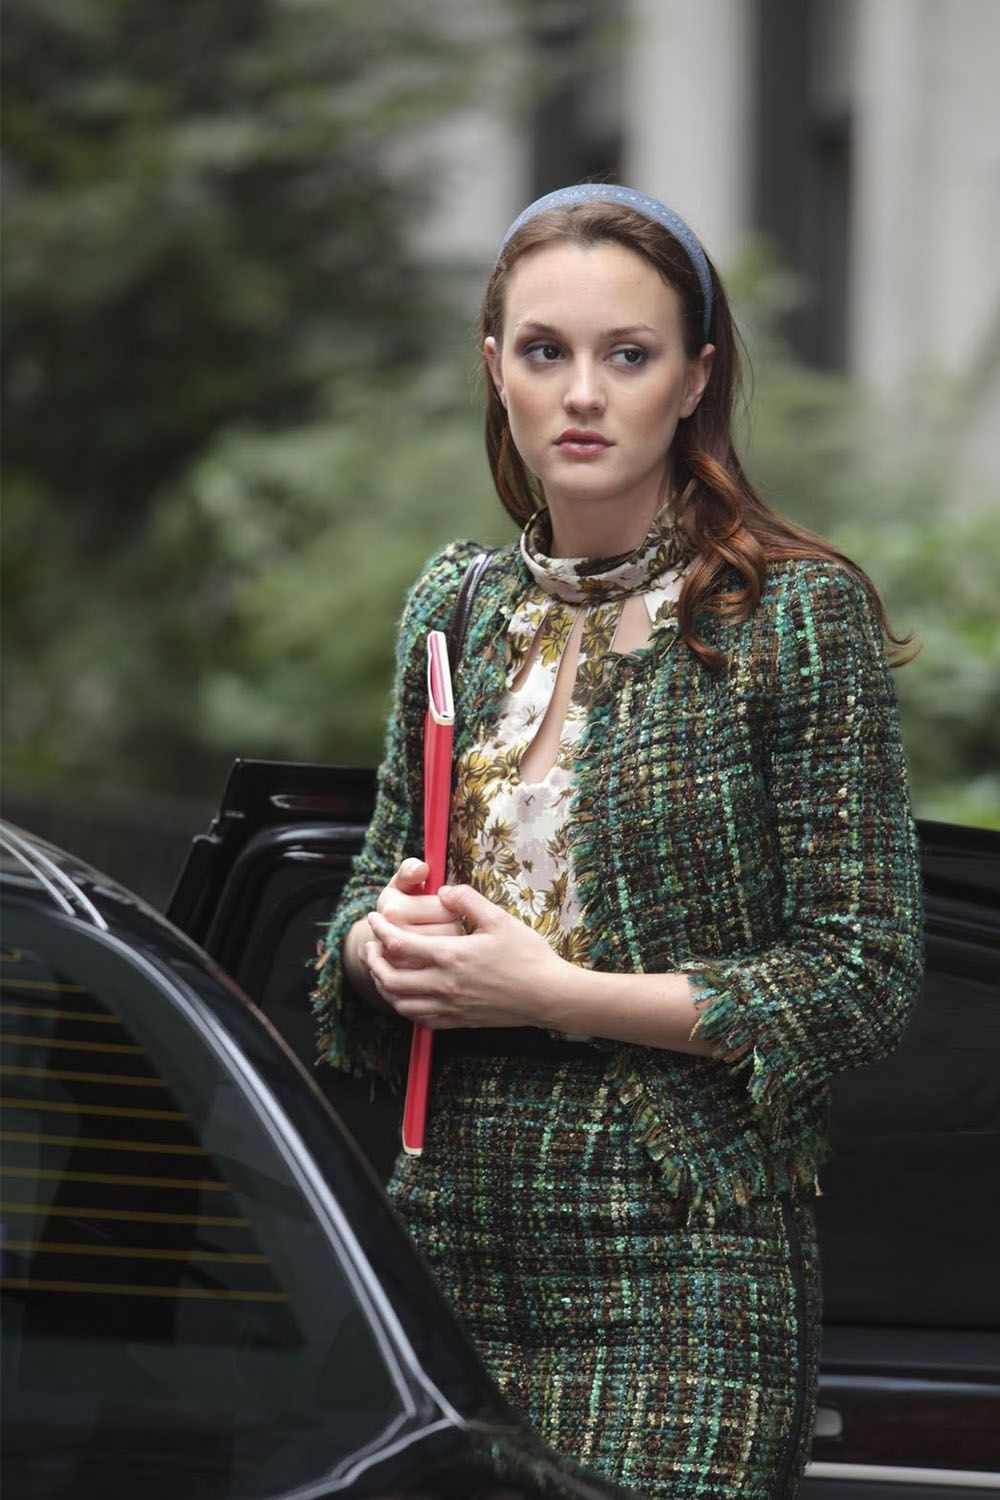 Three Outfits Inspired by Gossip Girl